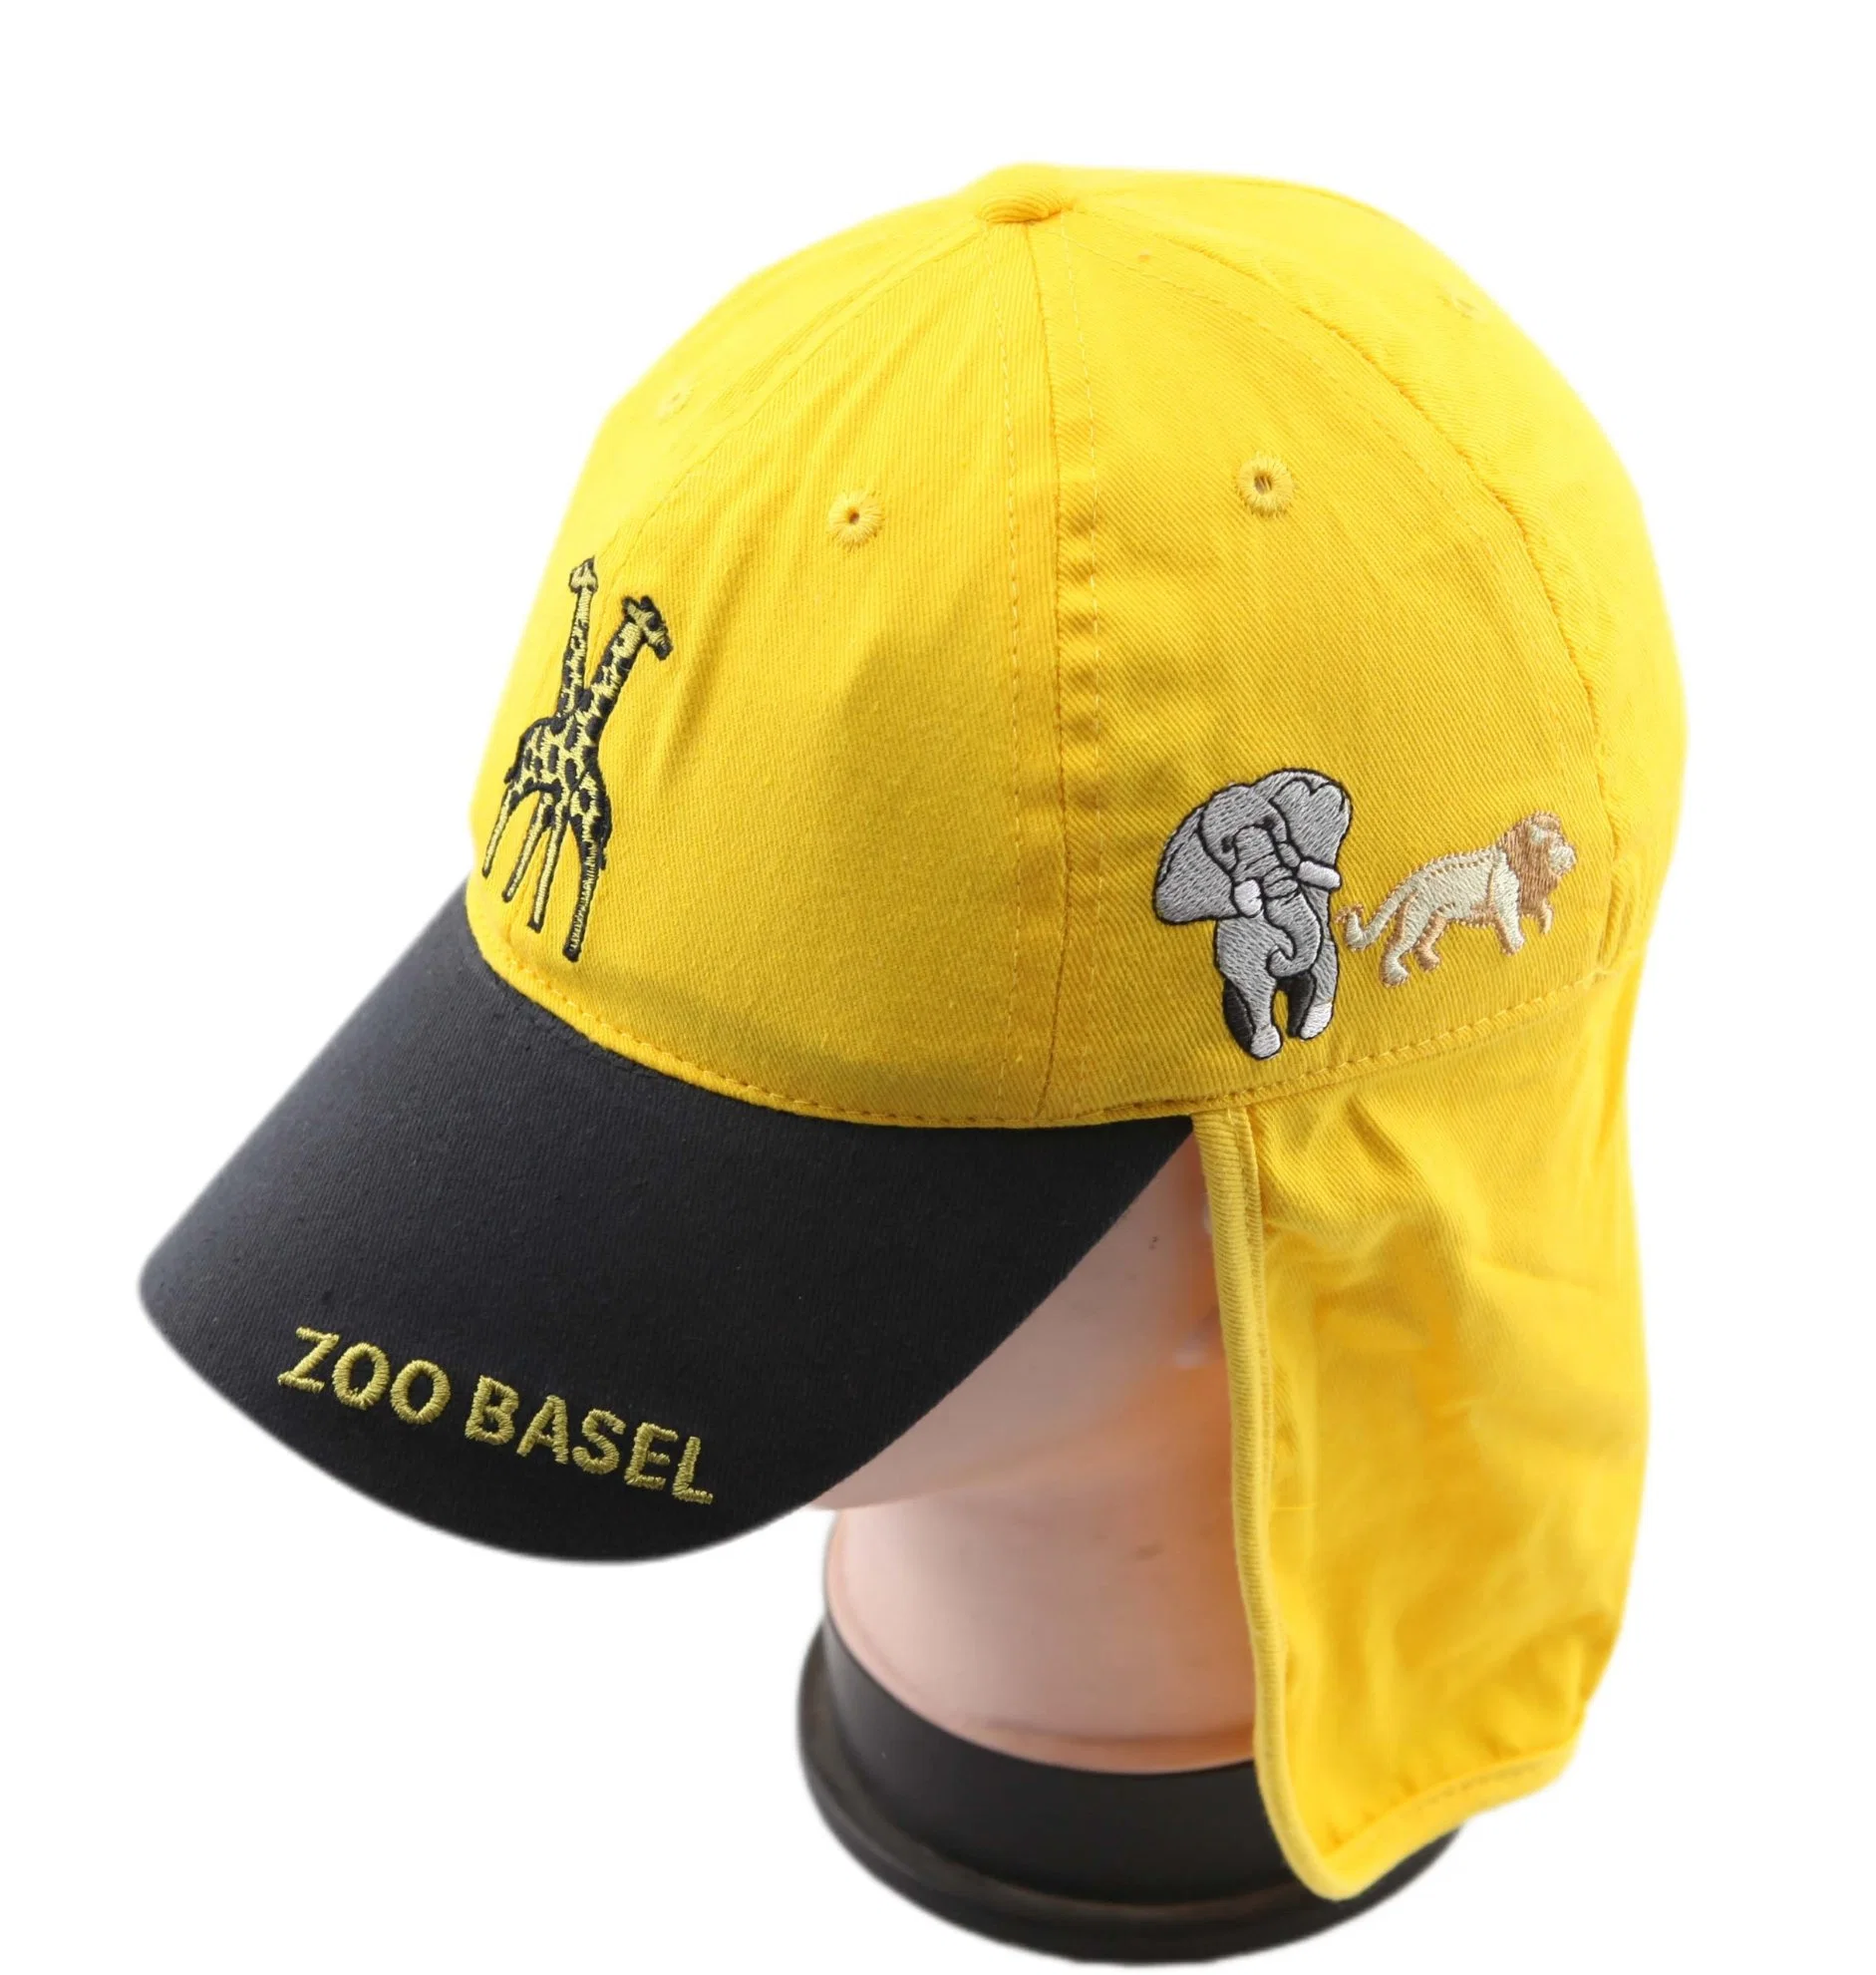 Kids Cap with Cute Animal Embroidery Cotton Baseball Cap for Outdoor Sun Protective Hat for Outside Sports Cap